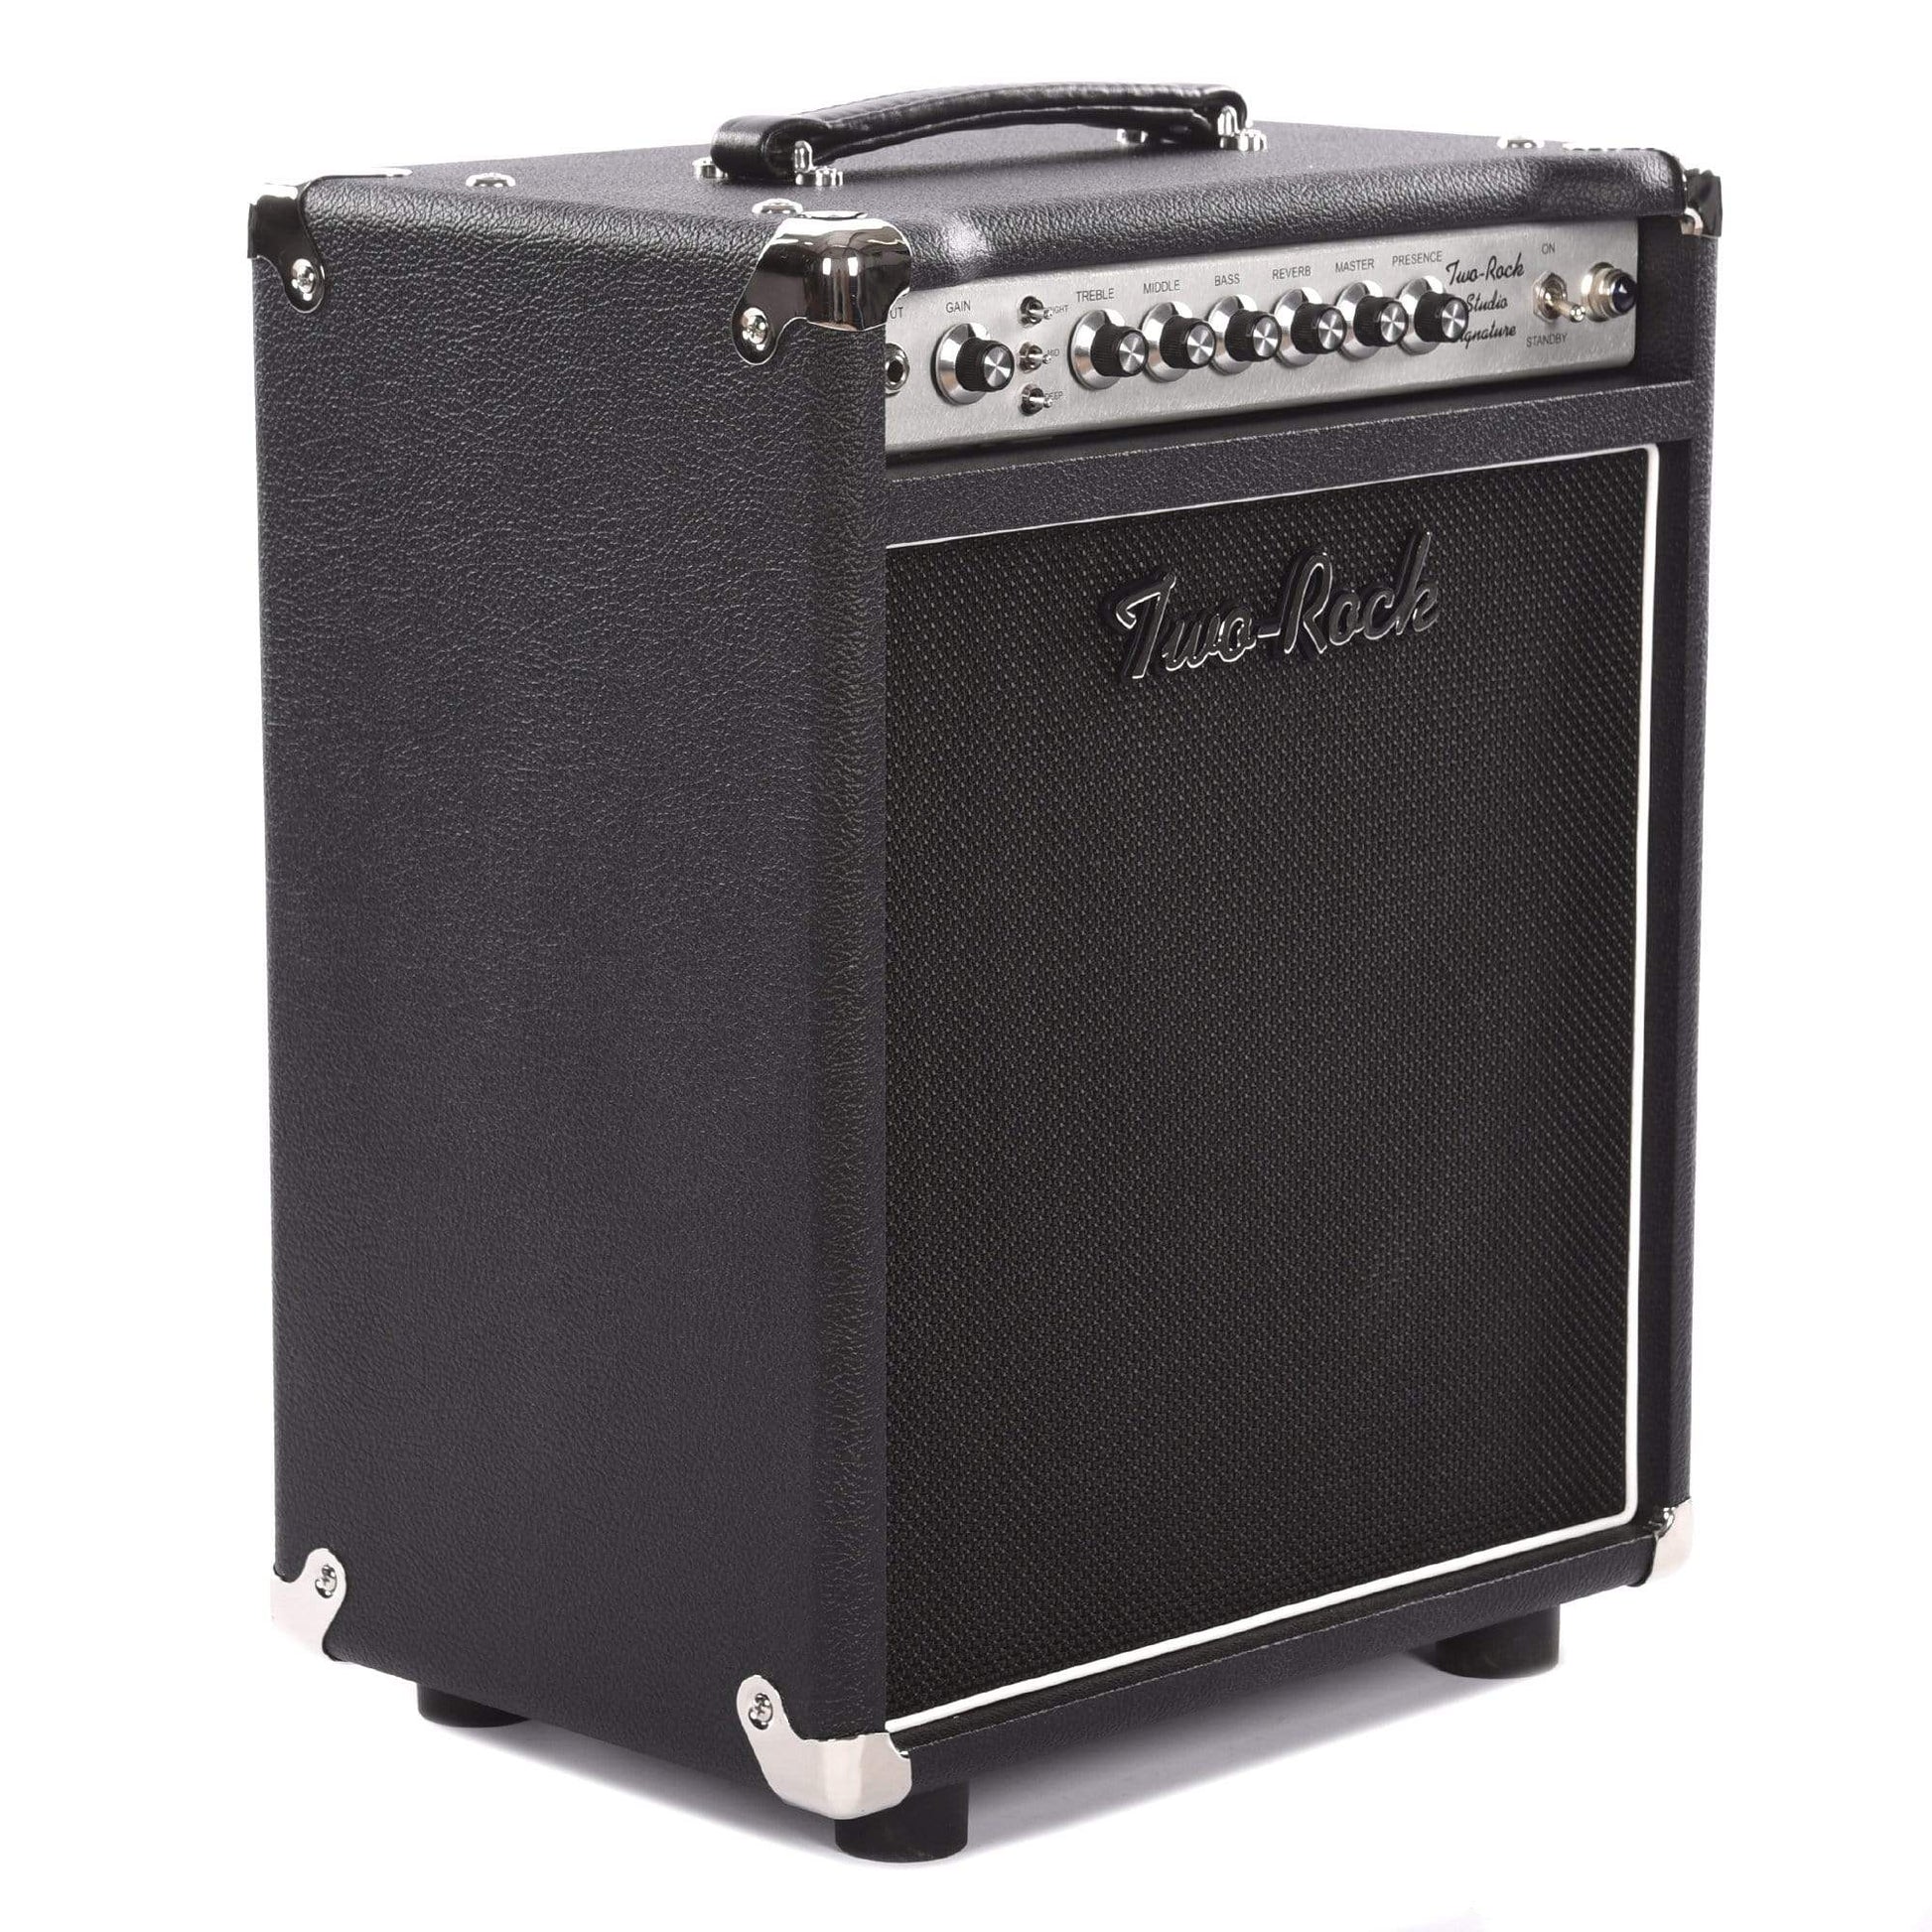 Two Rock Studio Signature 1x12 35W Combo Amp Silver Anodize Chasis w/Black Tolex & Silver Knobs Amps / Guitar Combos